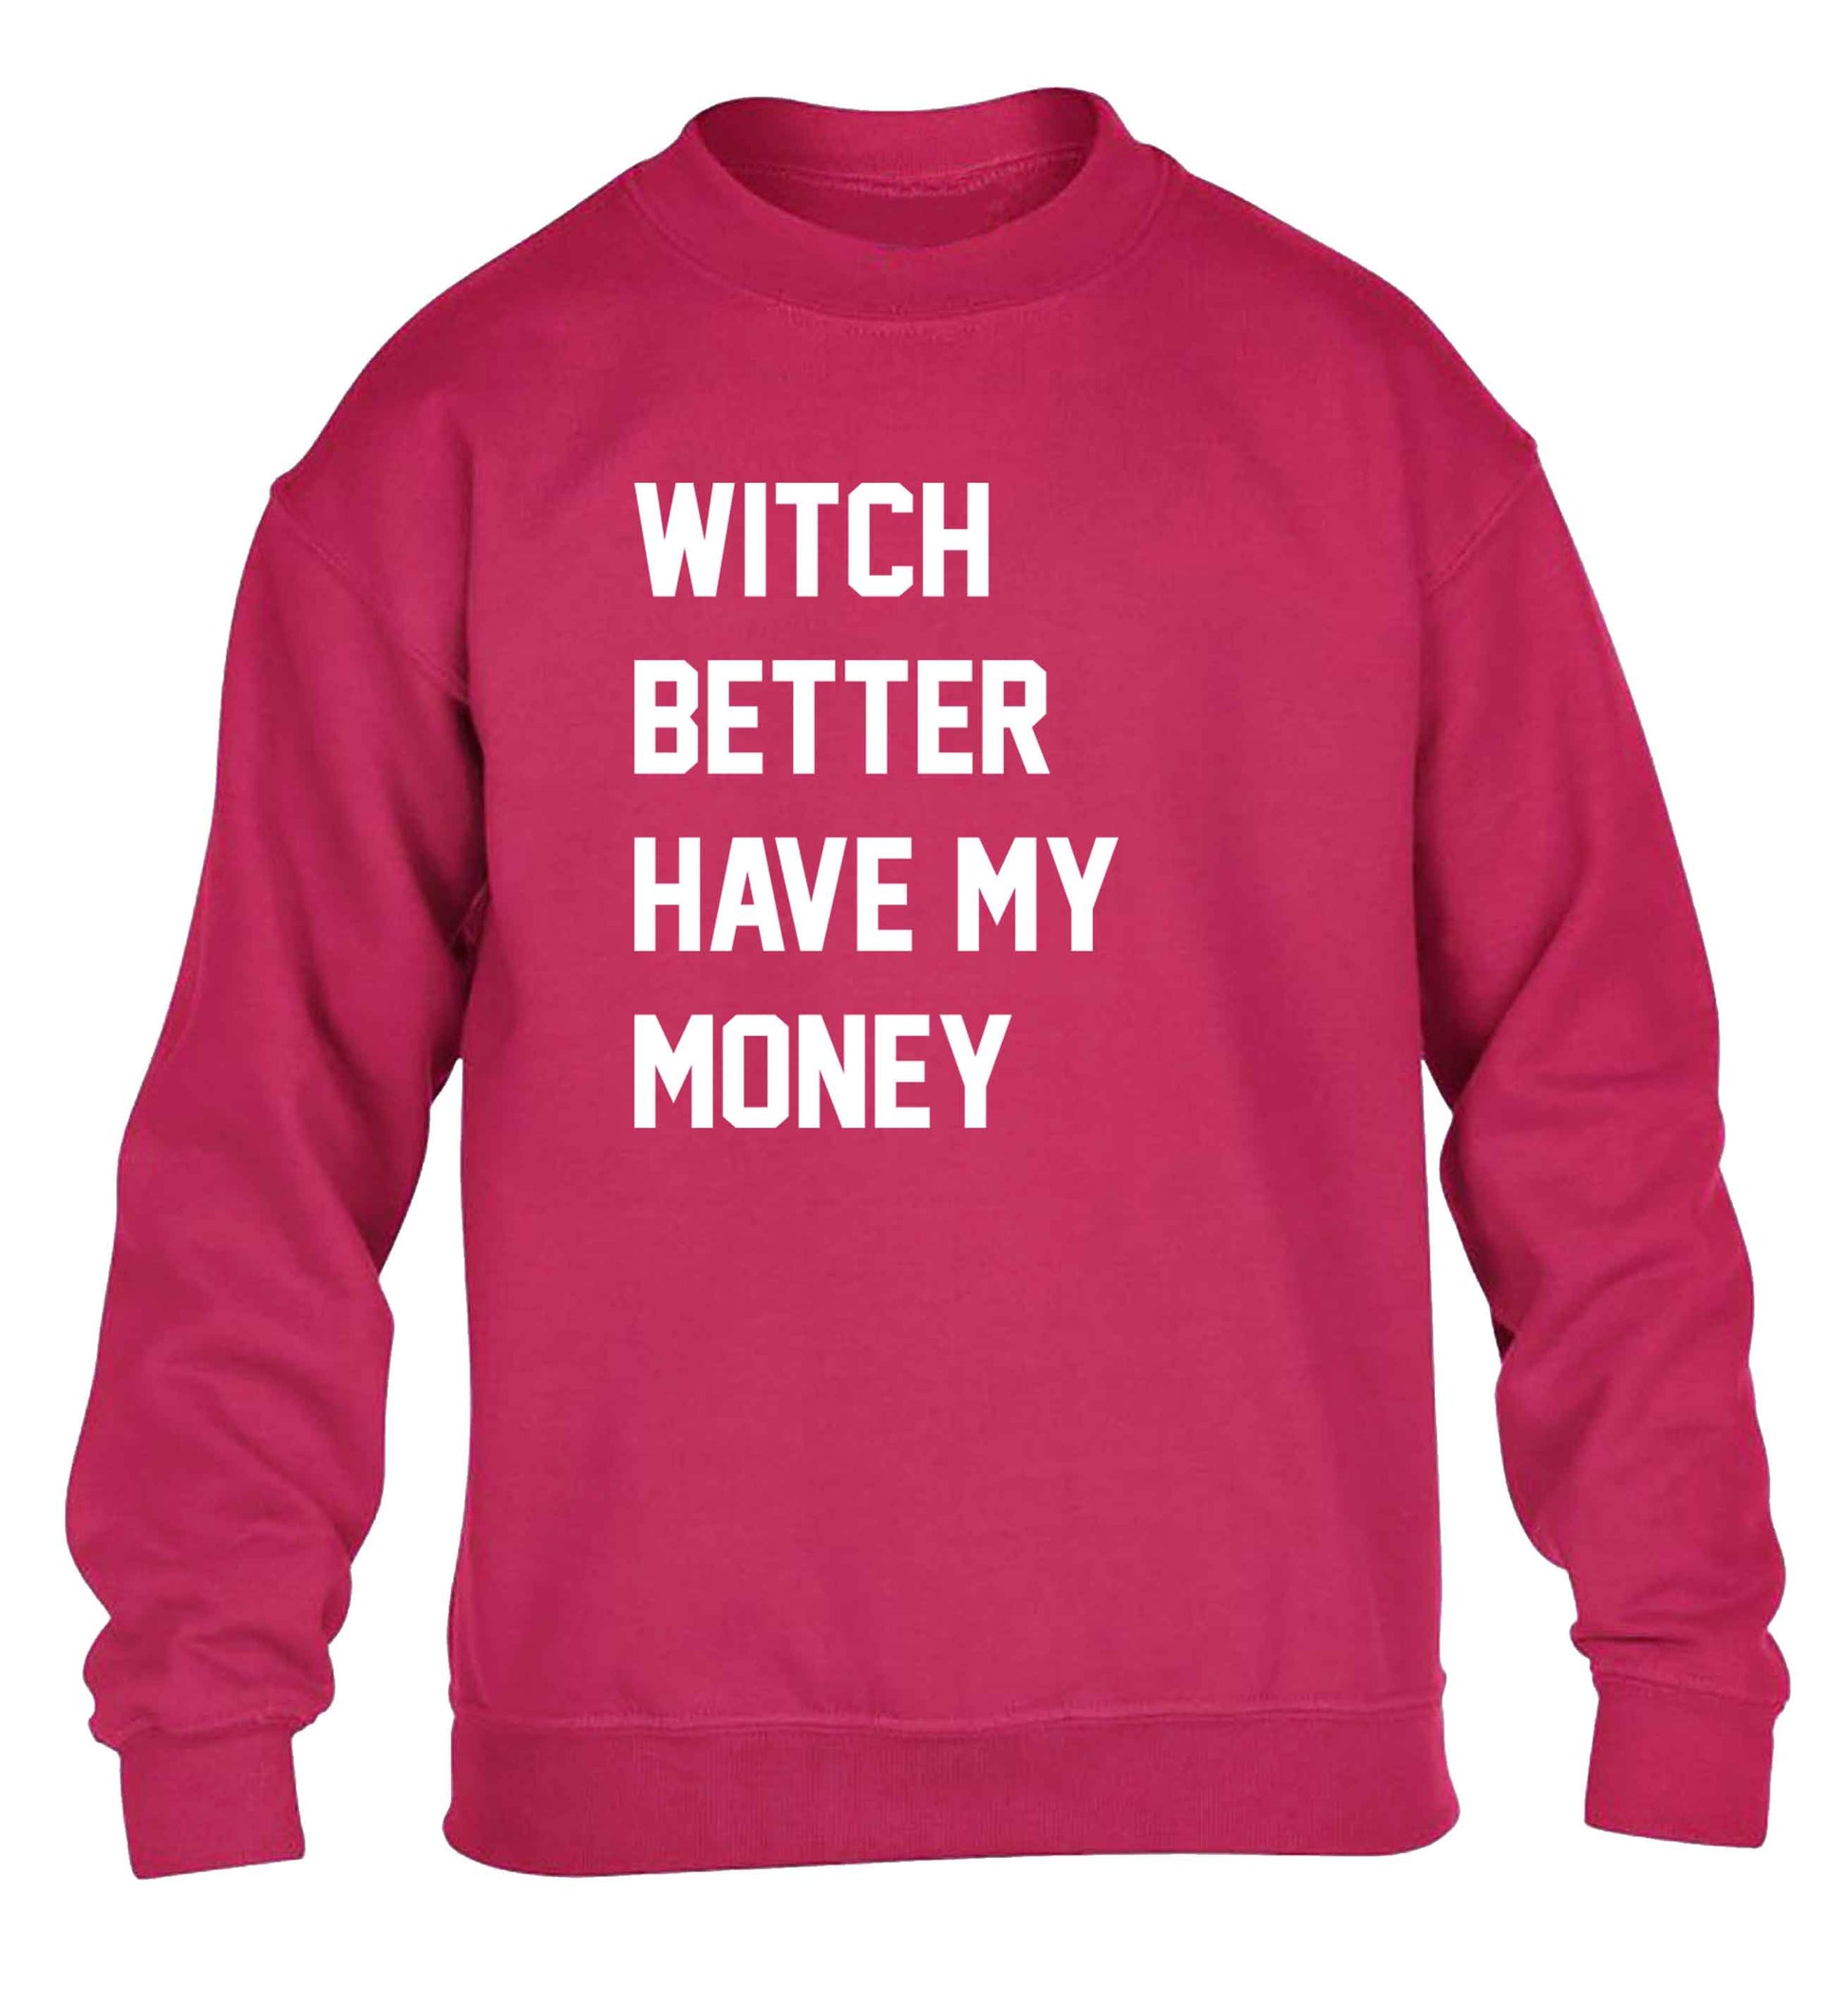 Witch better have my money children's pink sweater 12-13 Years